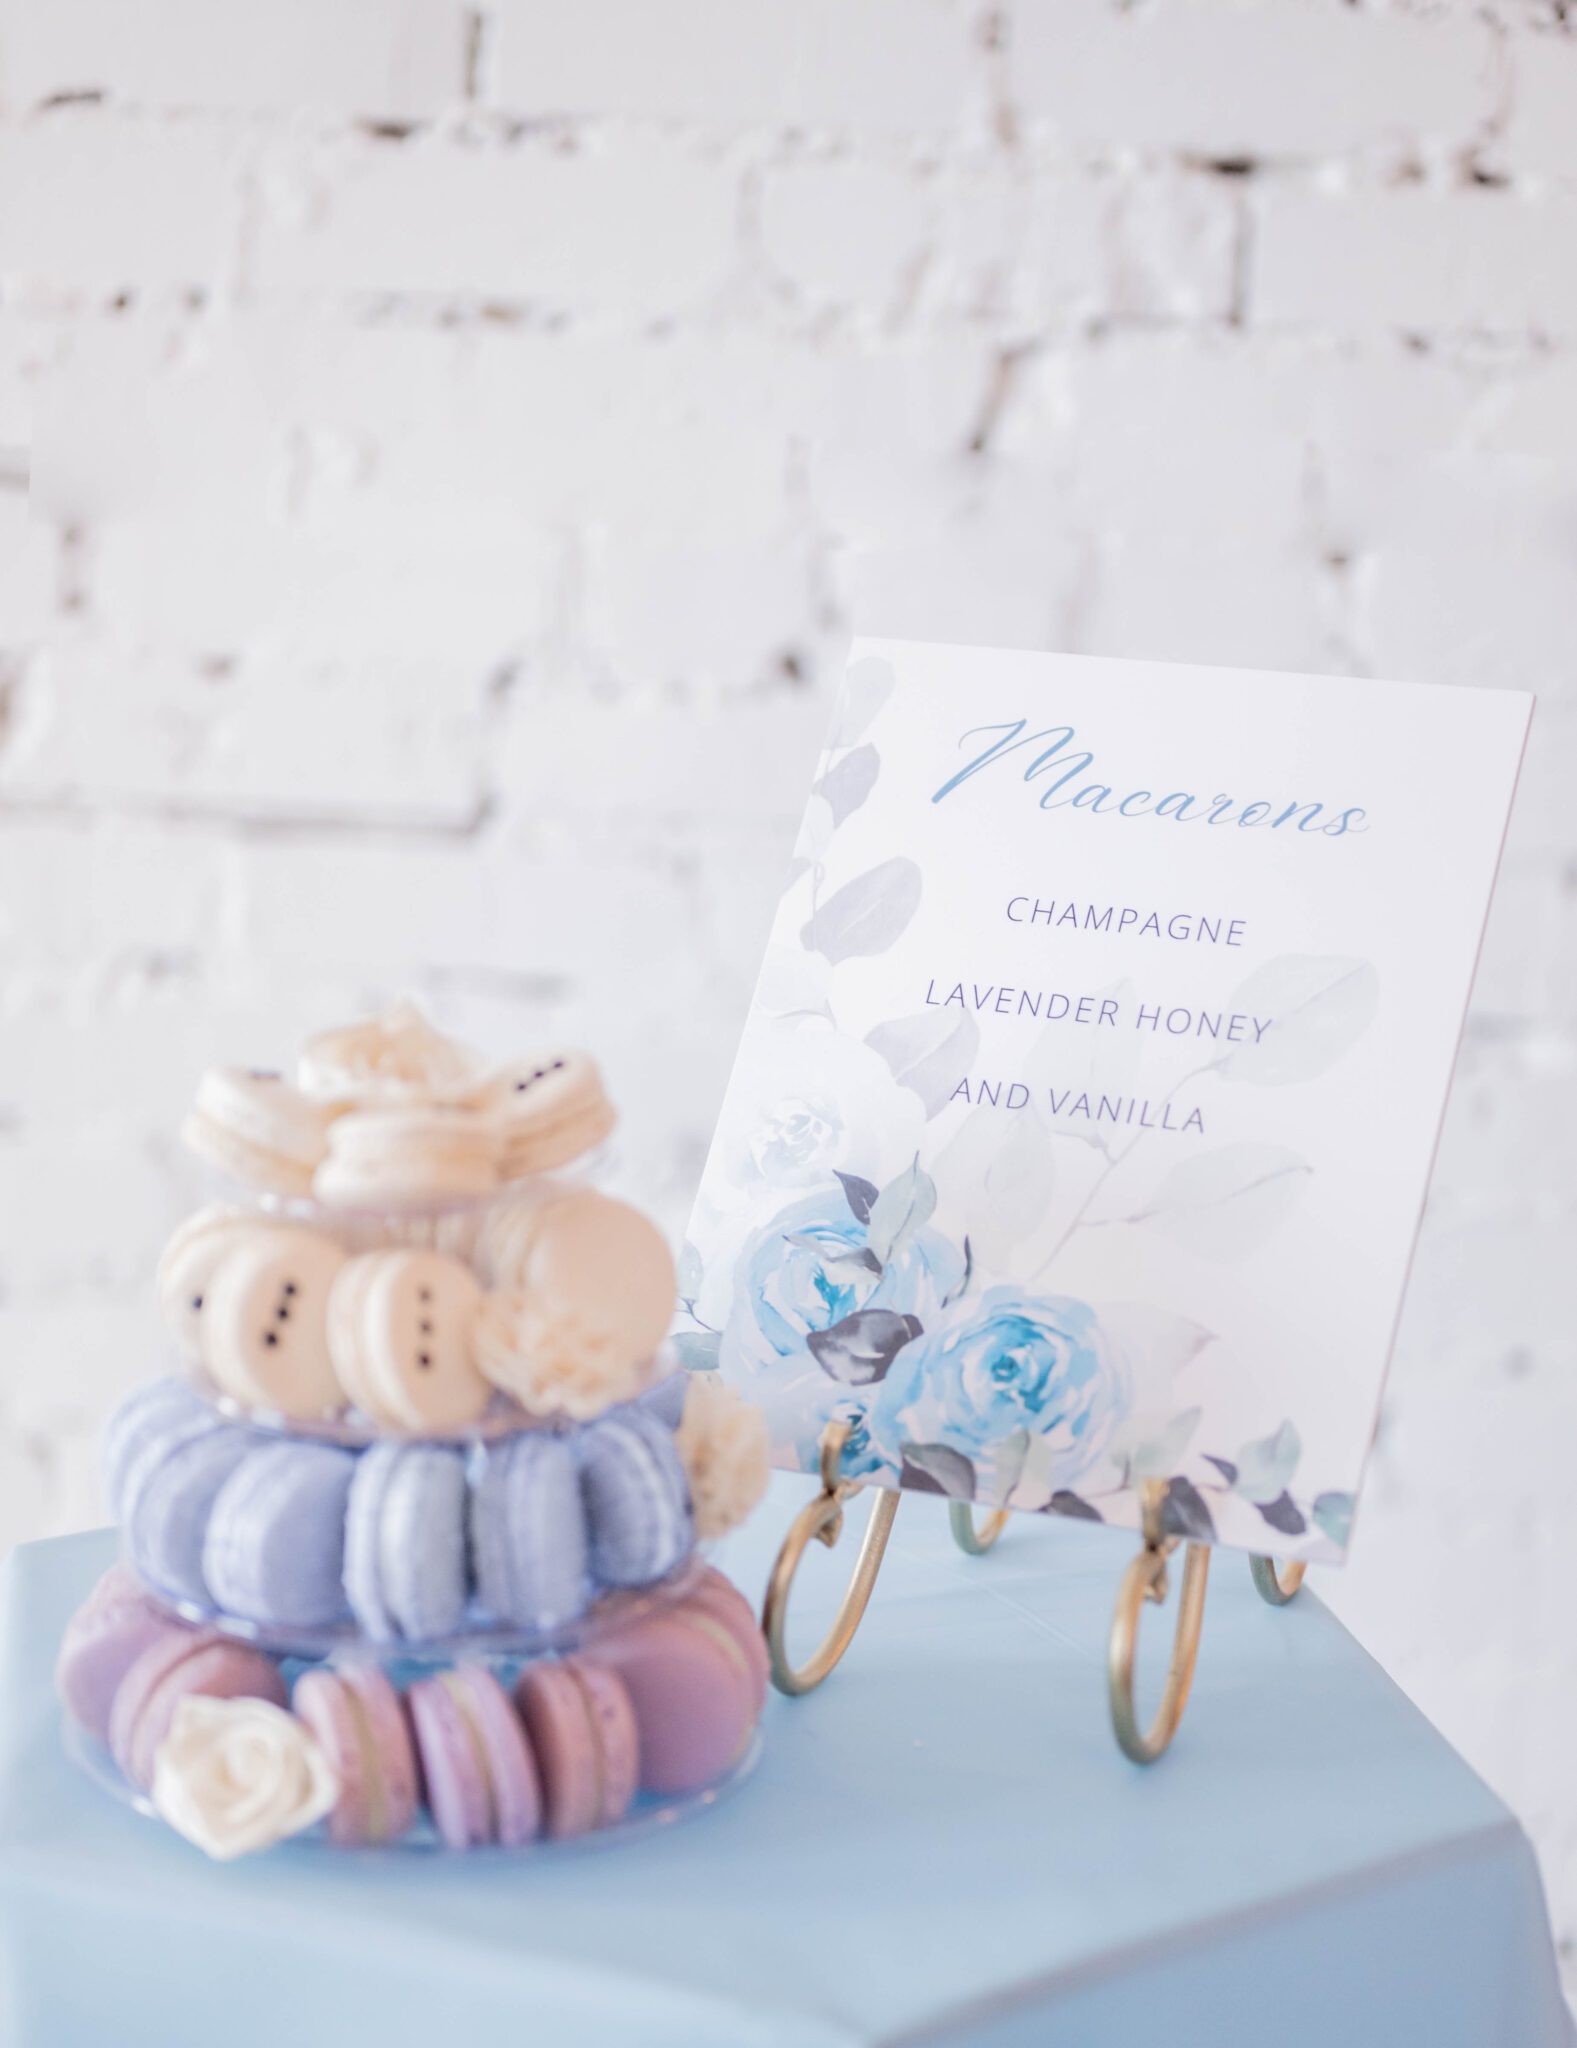 French macaron dessert ideas for wedding guests by Ollia Macarons & Tea, tiered display of macarons in purple, baby blue and creamy white decorated with white florals, dessert table with blue linen and custom dessert sign sitting in a vintage brass easel